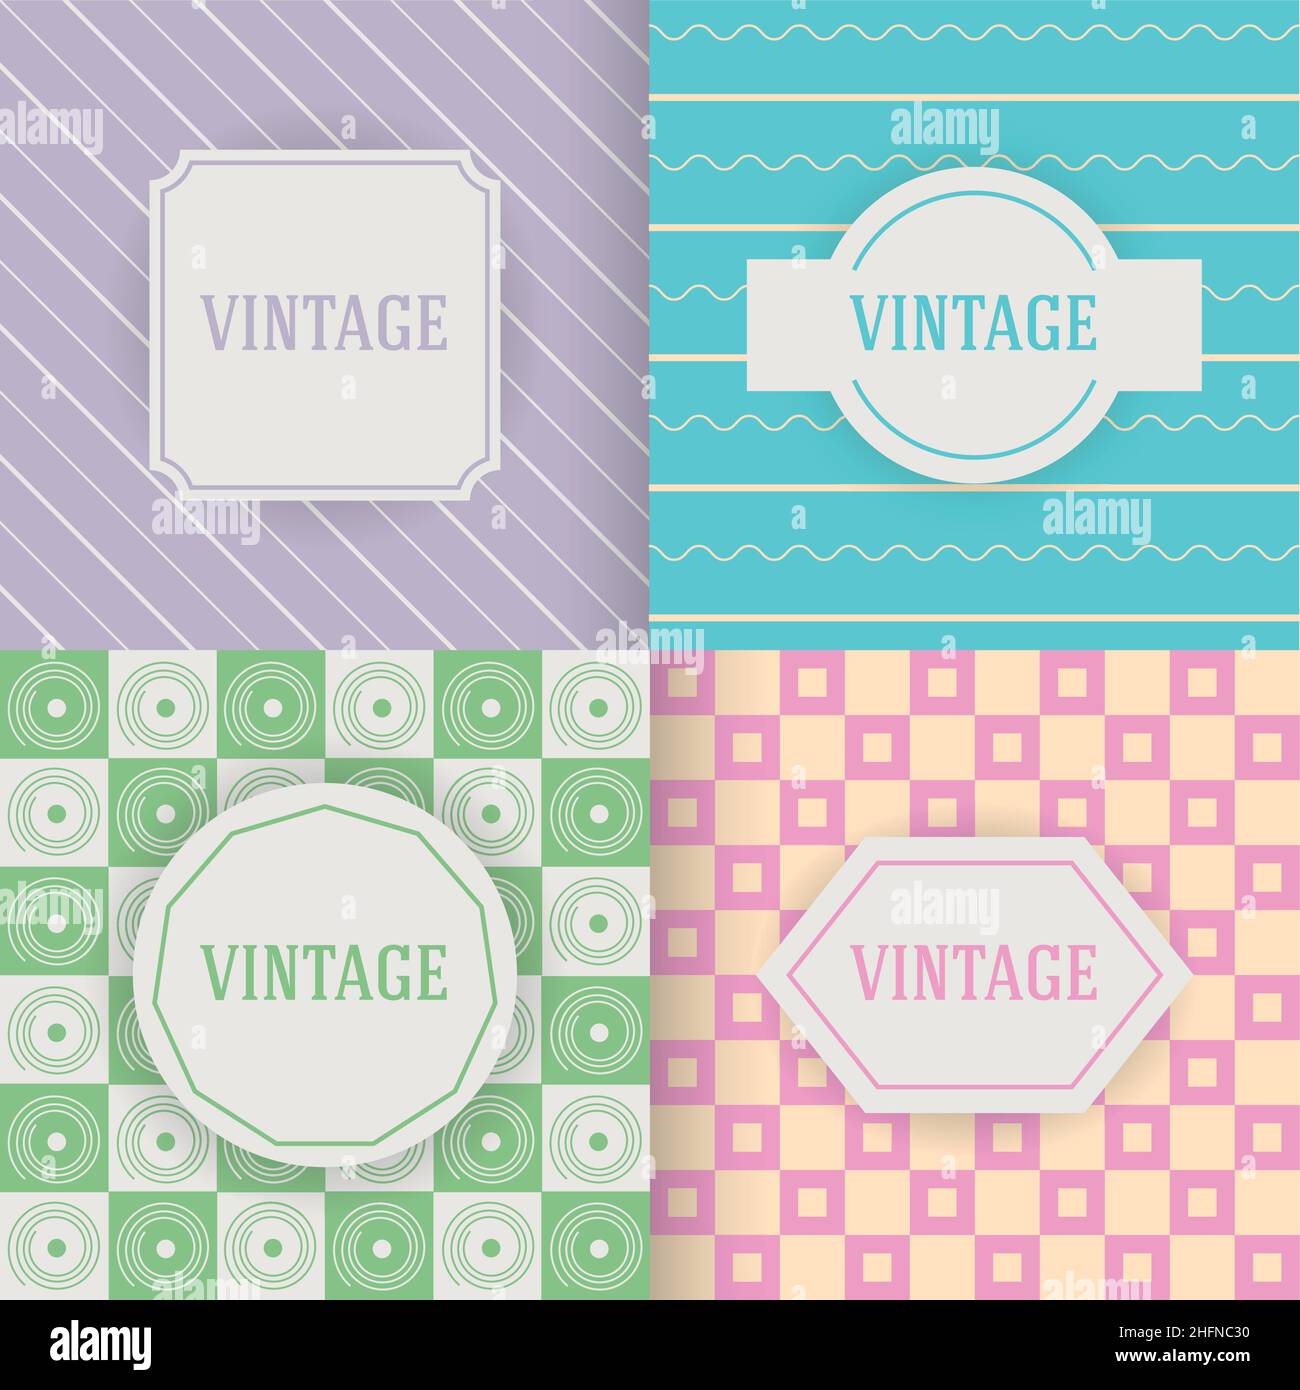 Set of vintage patterns, vector illustration, for web and graphic design Stock Vector